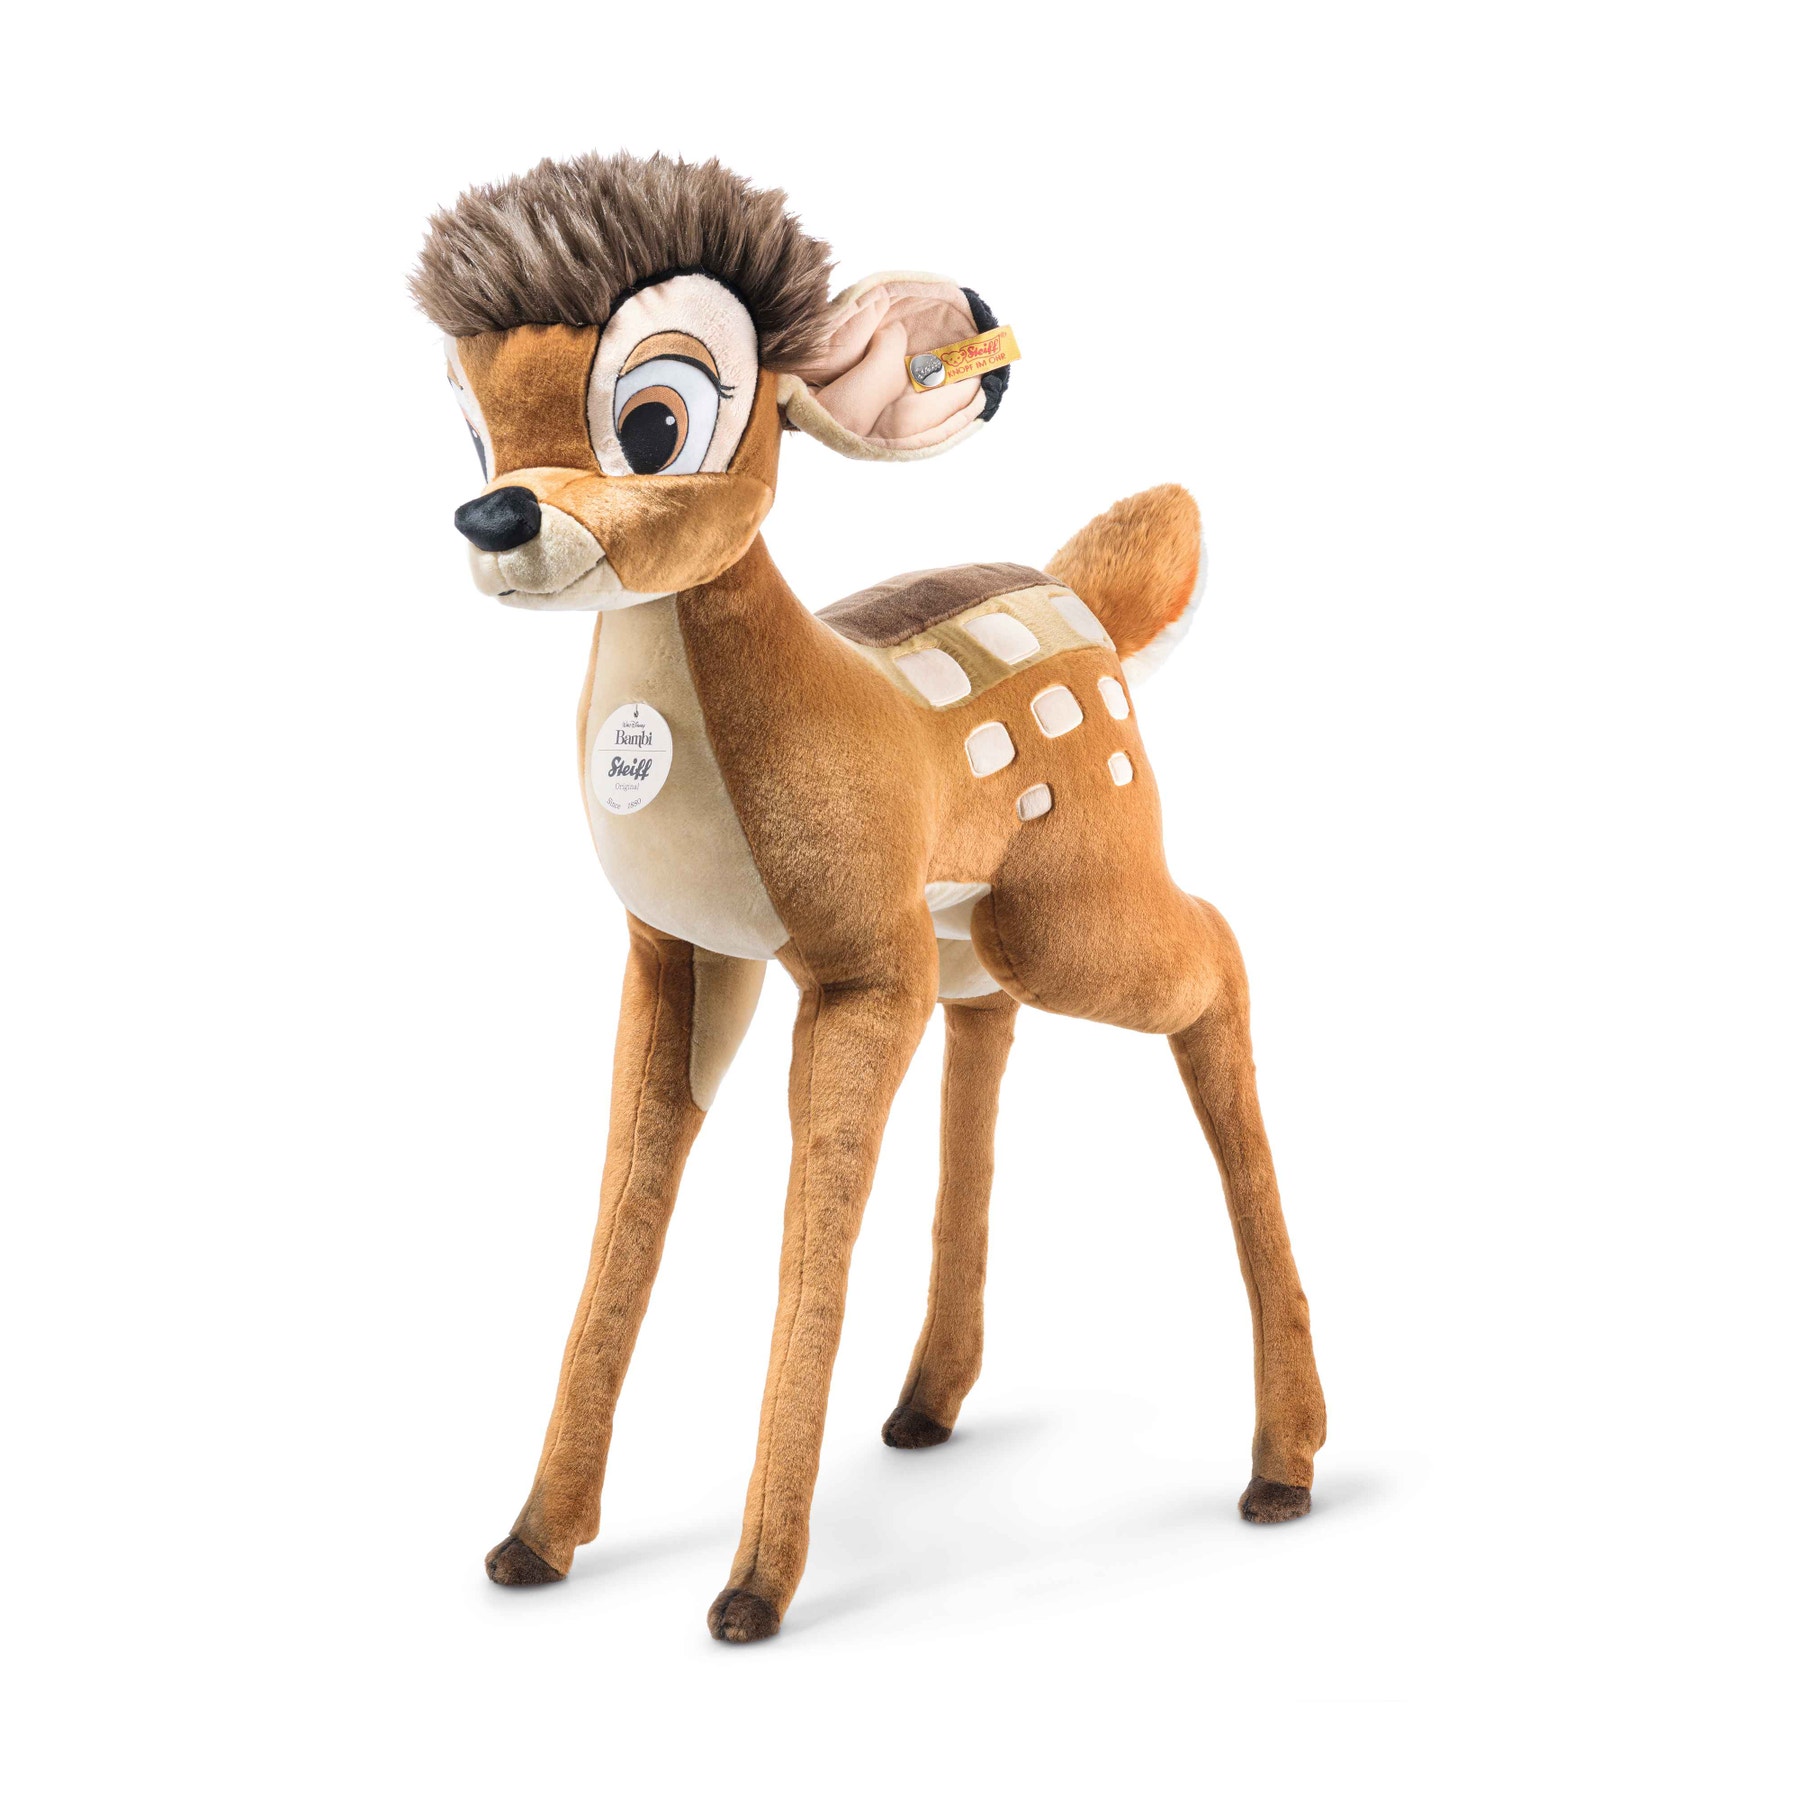 Disney Studio Bambi with Free Butterfly Accessory